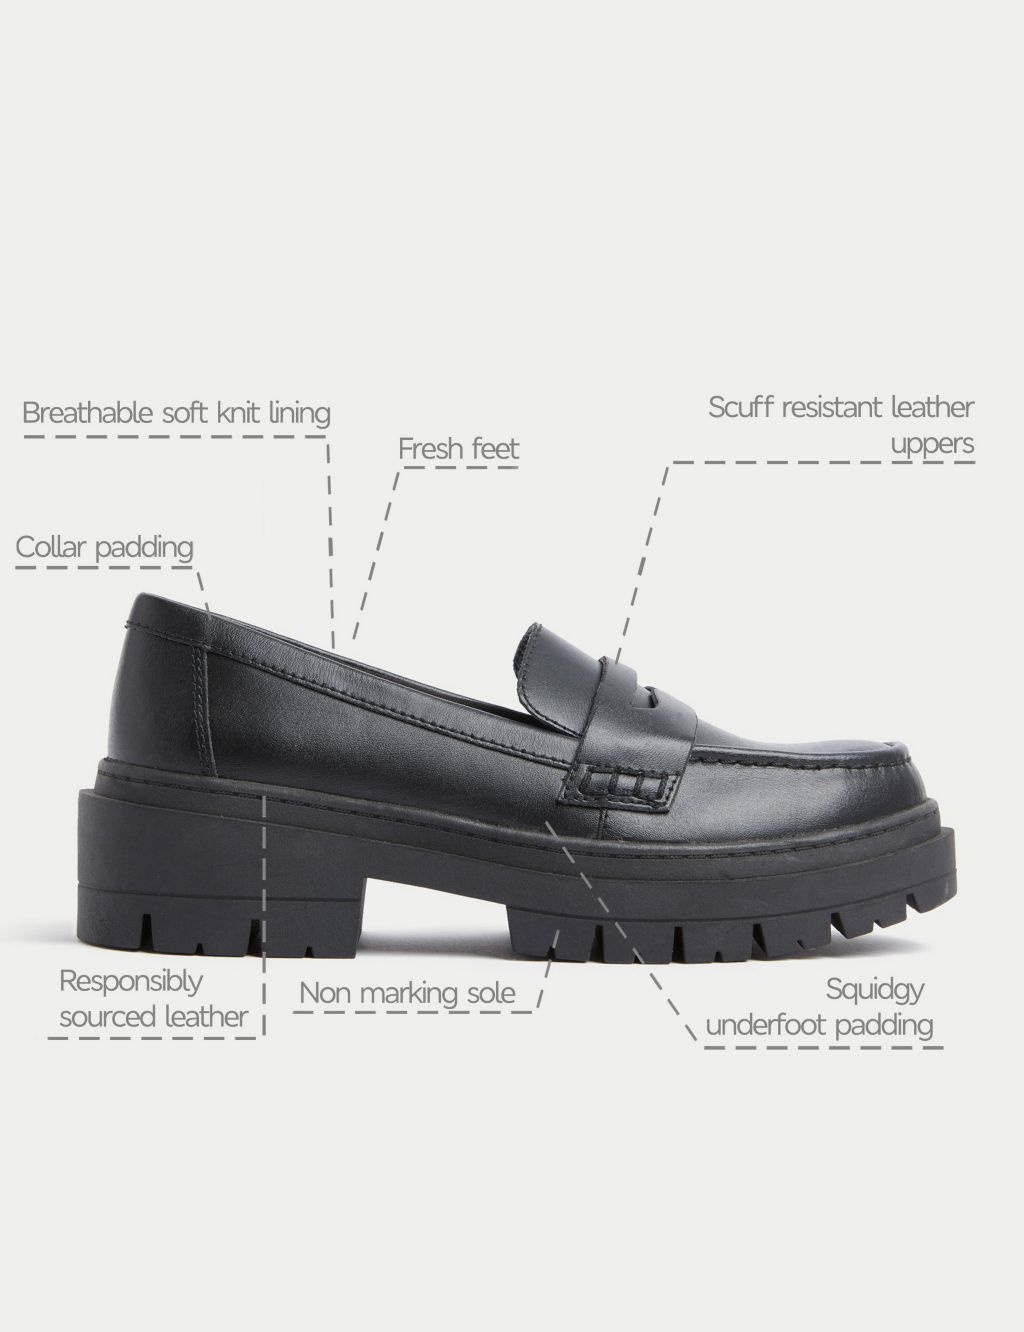 Kids' Leather Chunky School Loafer (13 Small - 7 Large) image 5